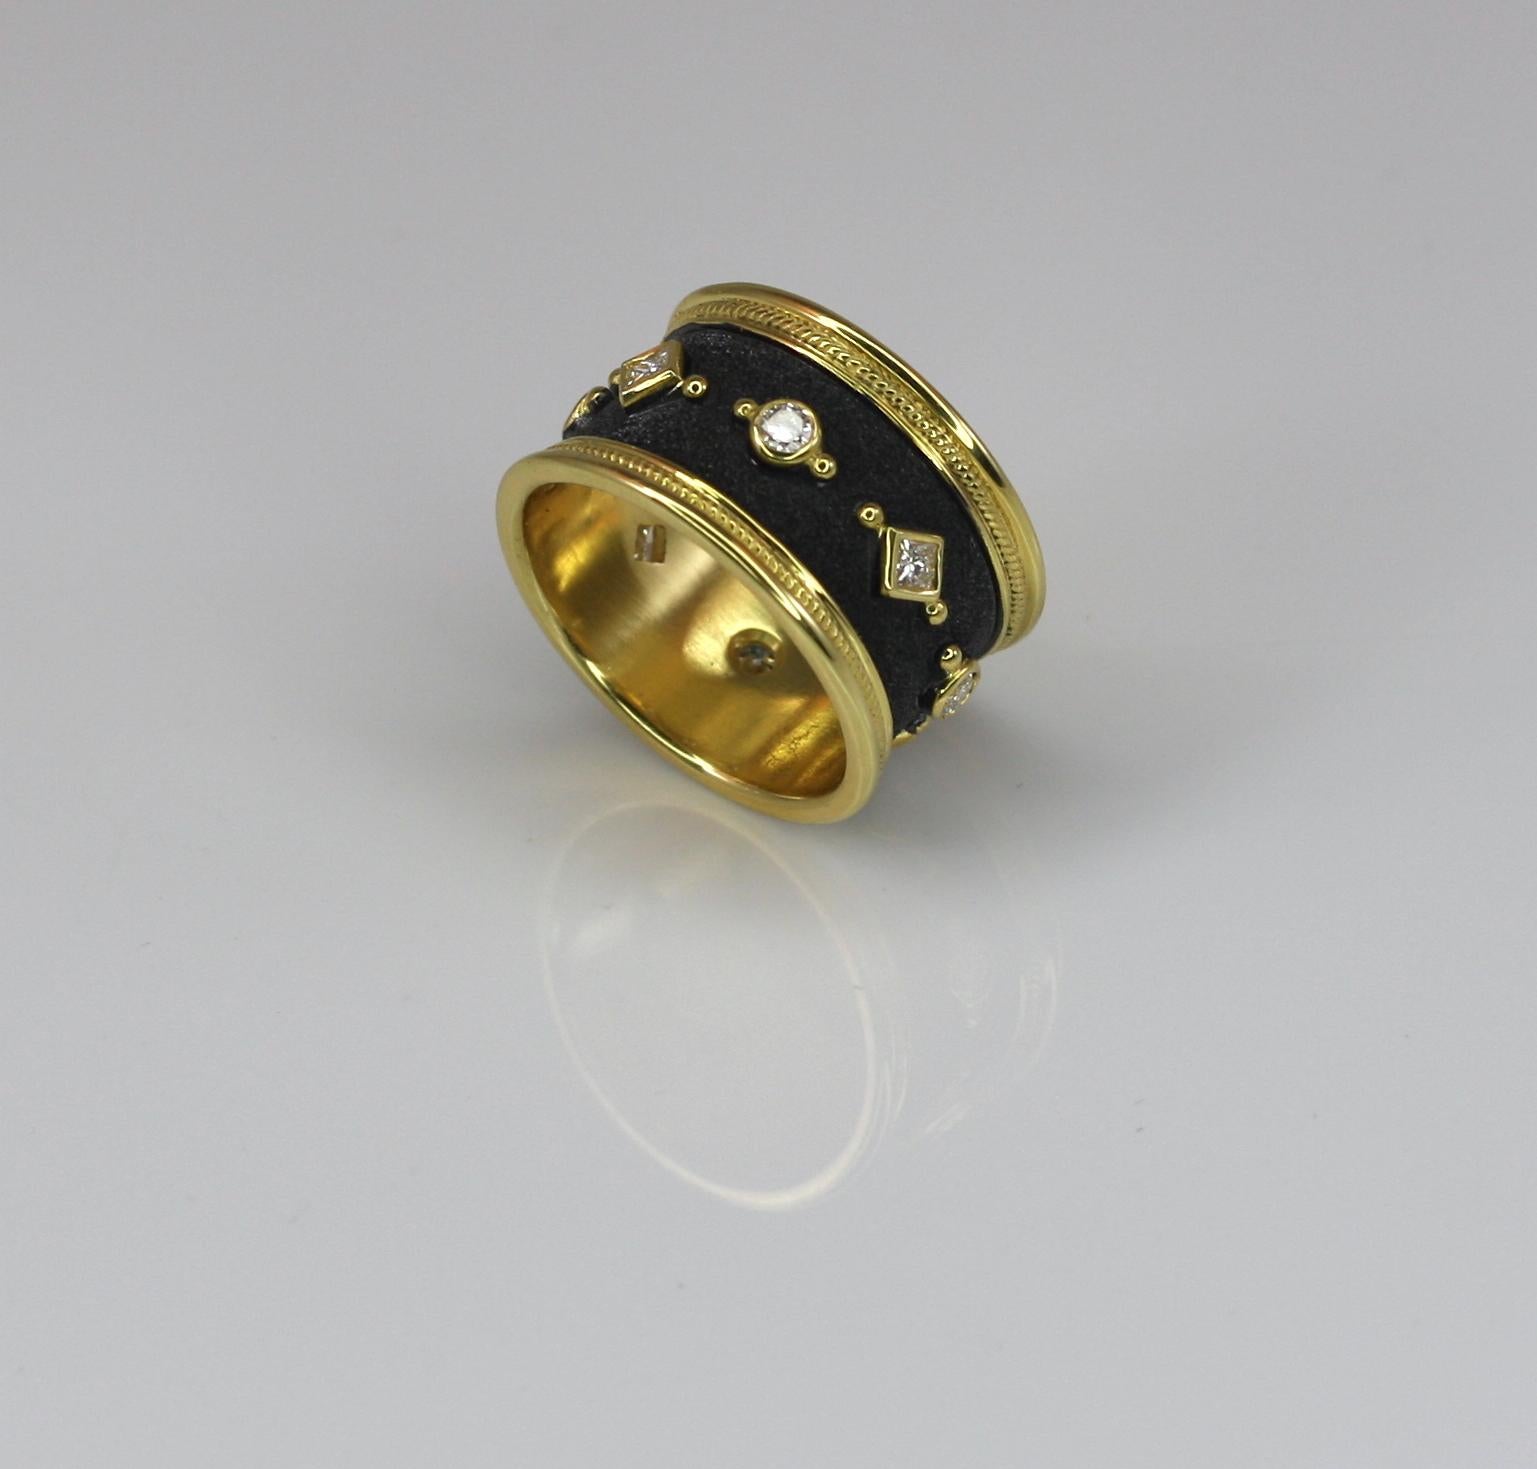 S.Georgios designer eternity band ring all handmade from solid 18 Karat yellow gold and microscopically decorated all the way around with gold beads and wires. The unique velvet background is finished with black rhodium which created a perfect